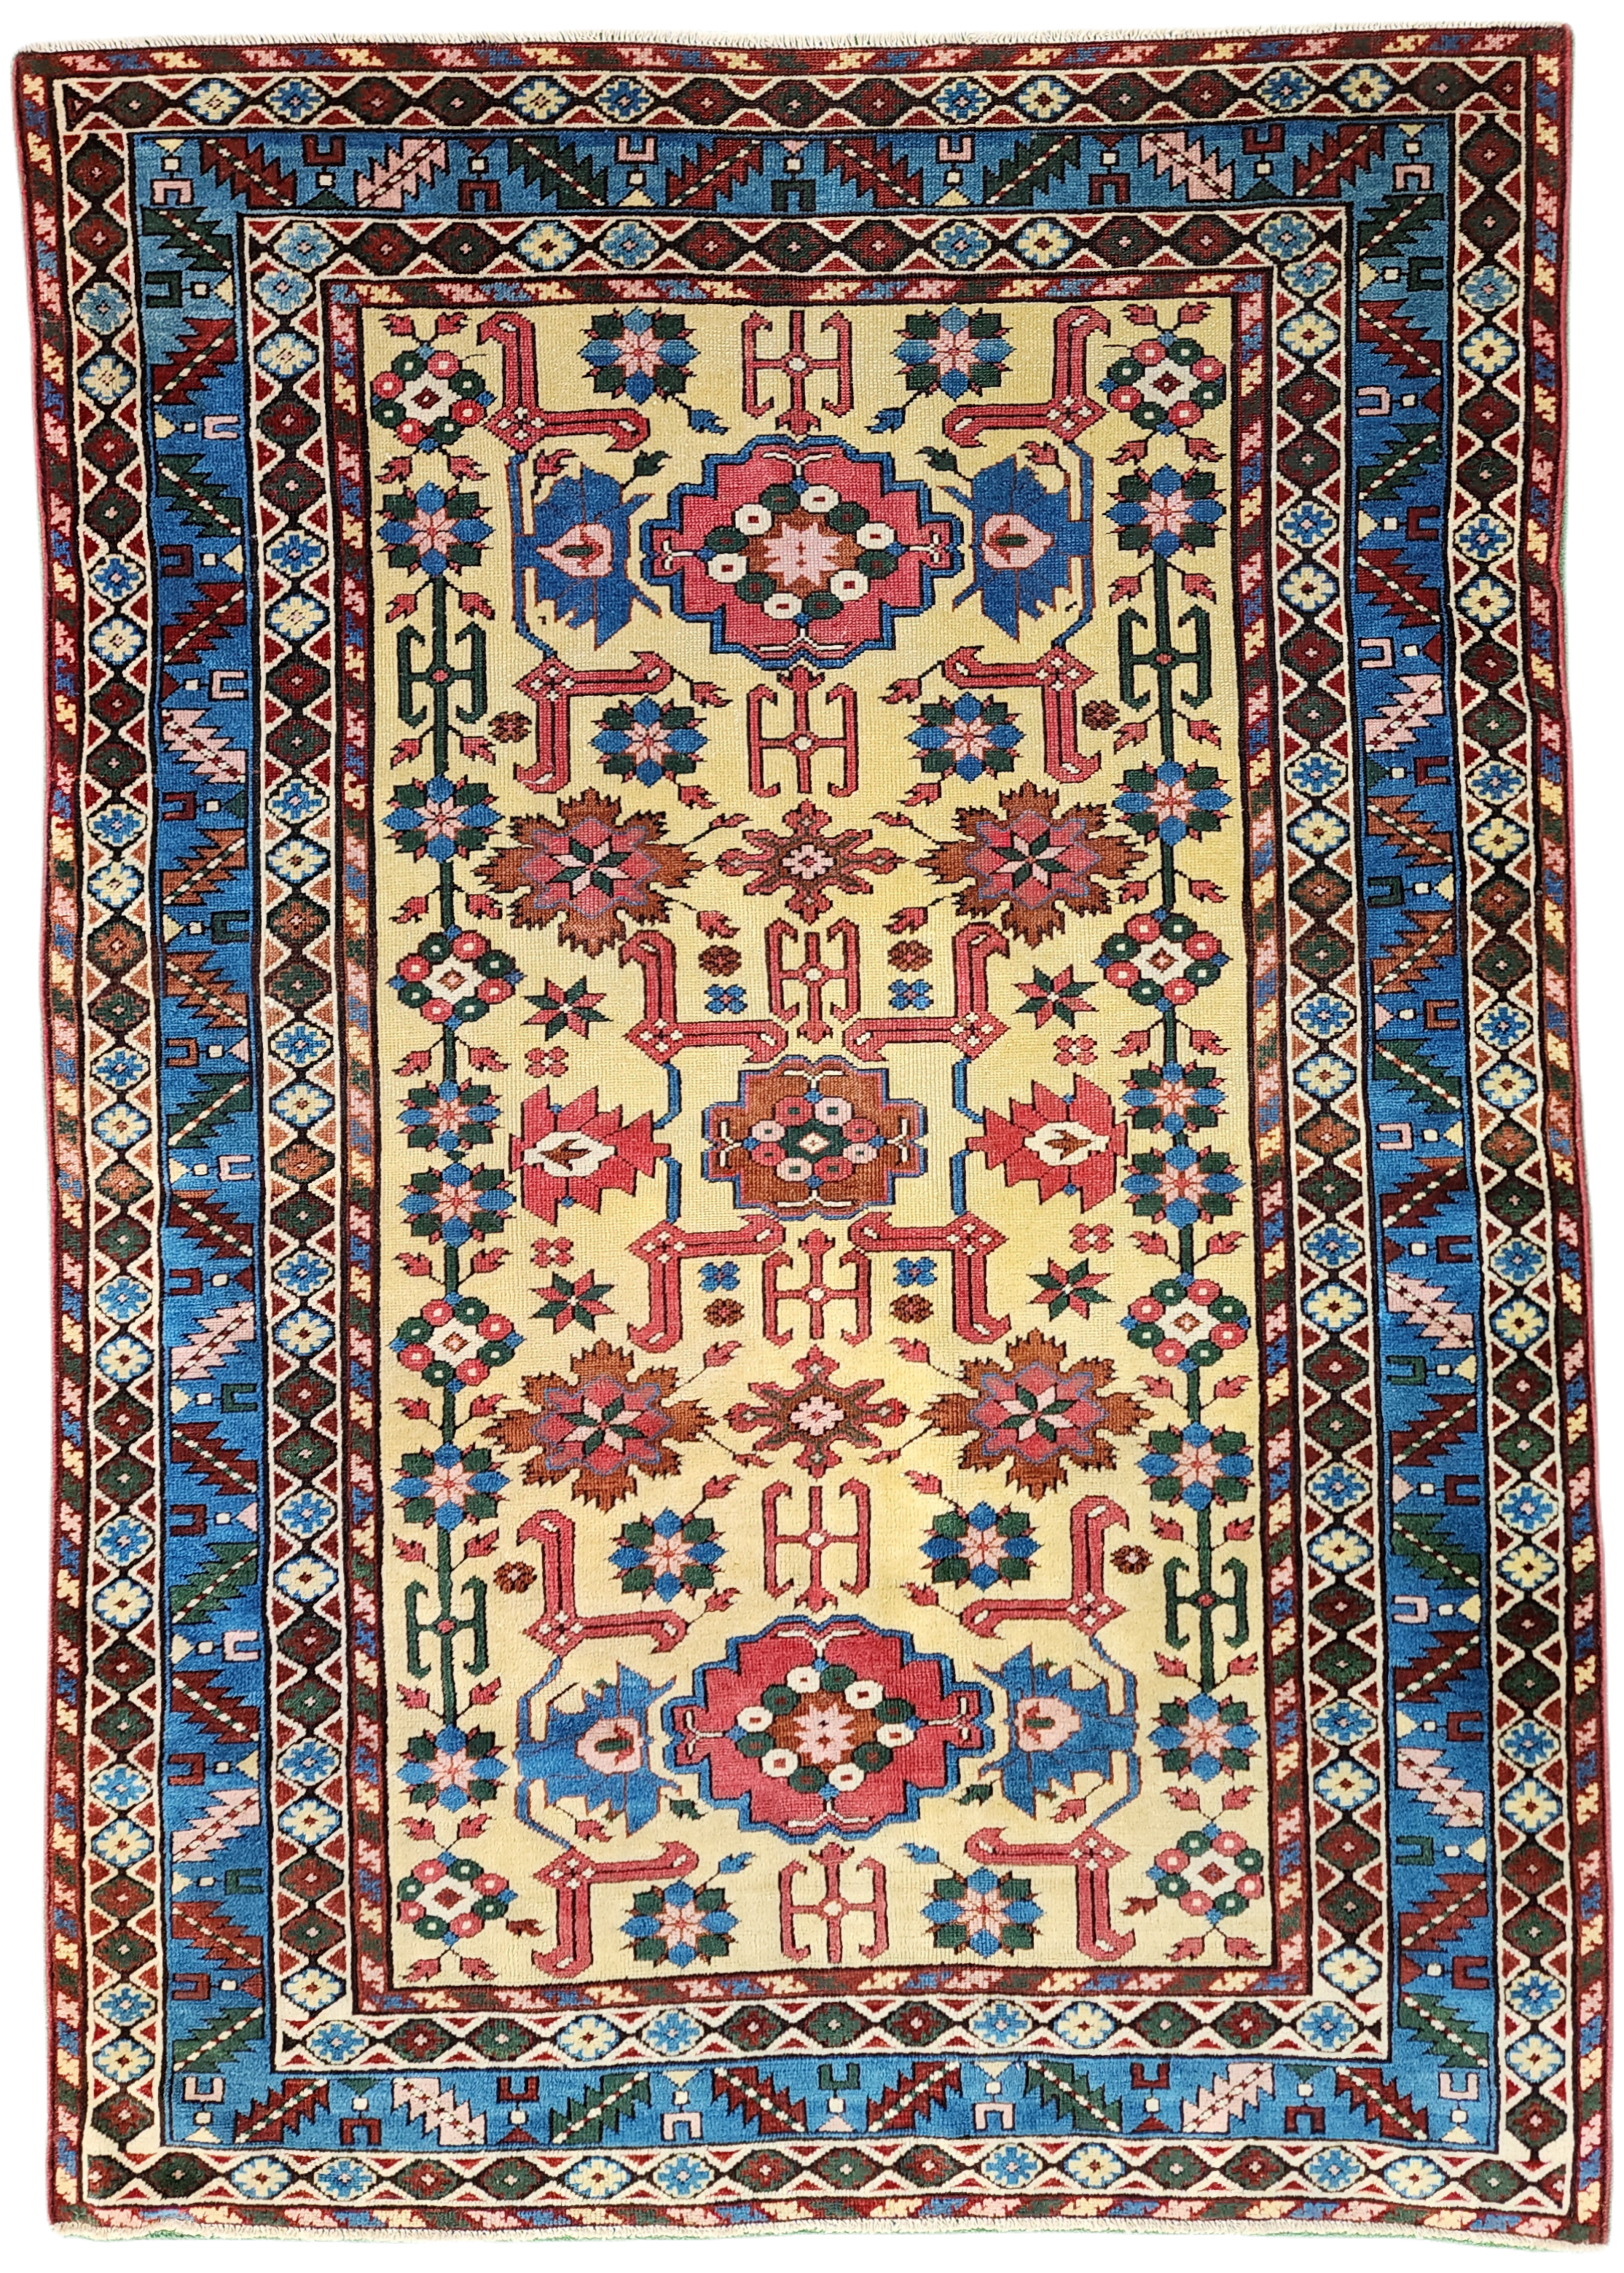 Antique Caucasian Shirvan Rug 6 x 4 ft, Yellow Blue and Red Tribal Caucasian Area Rug